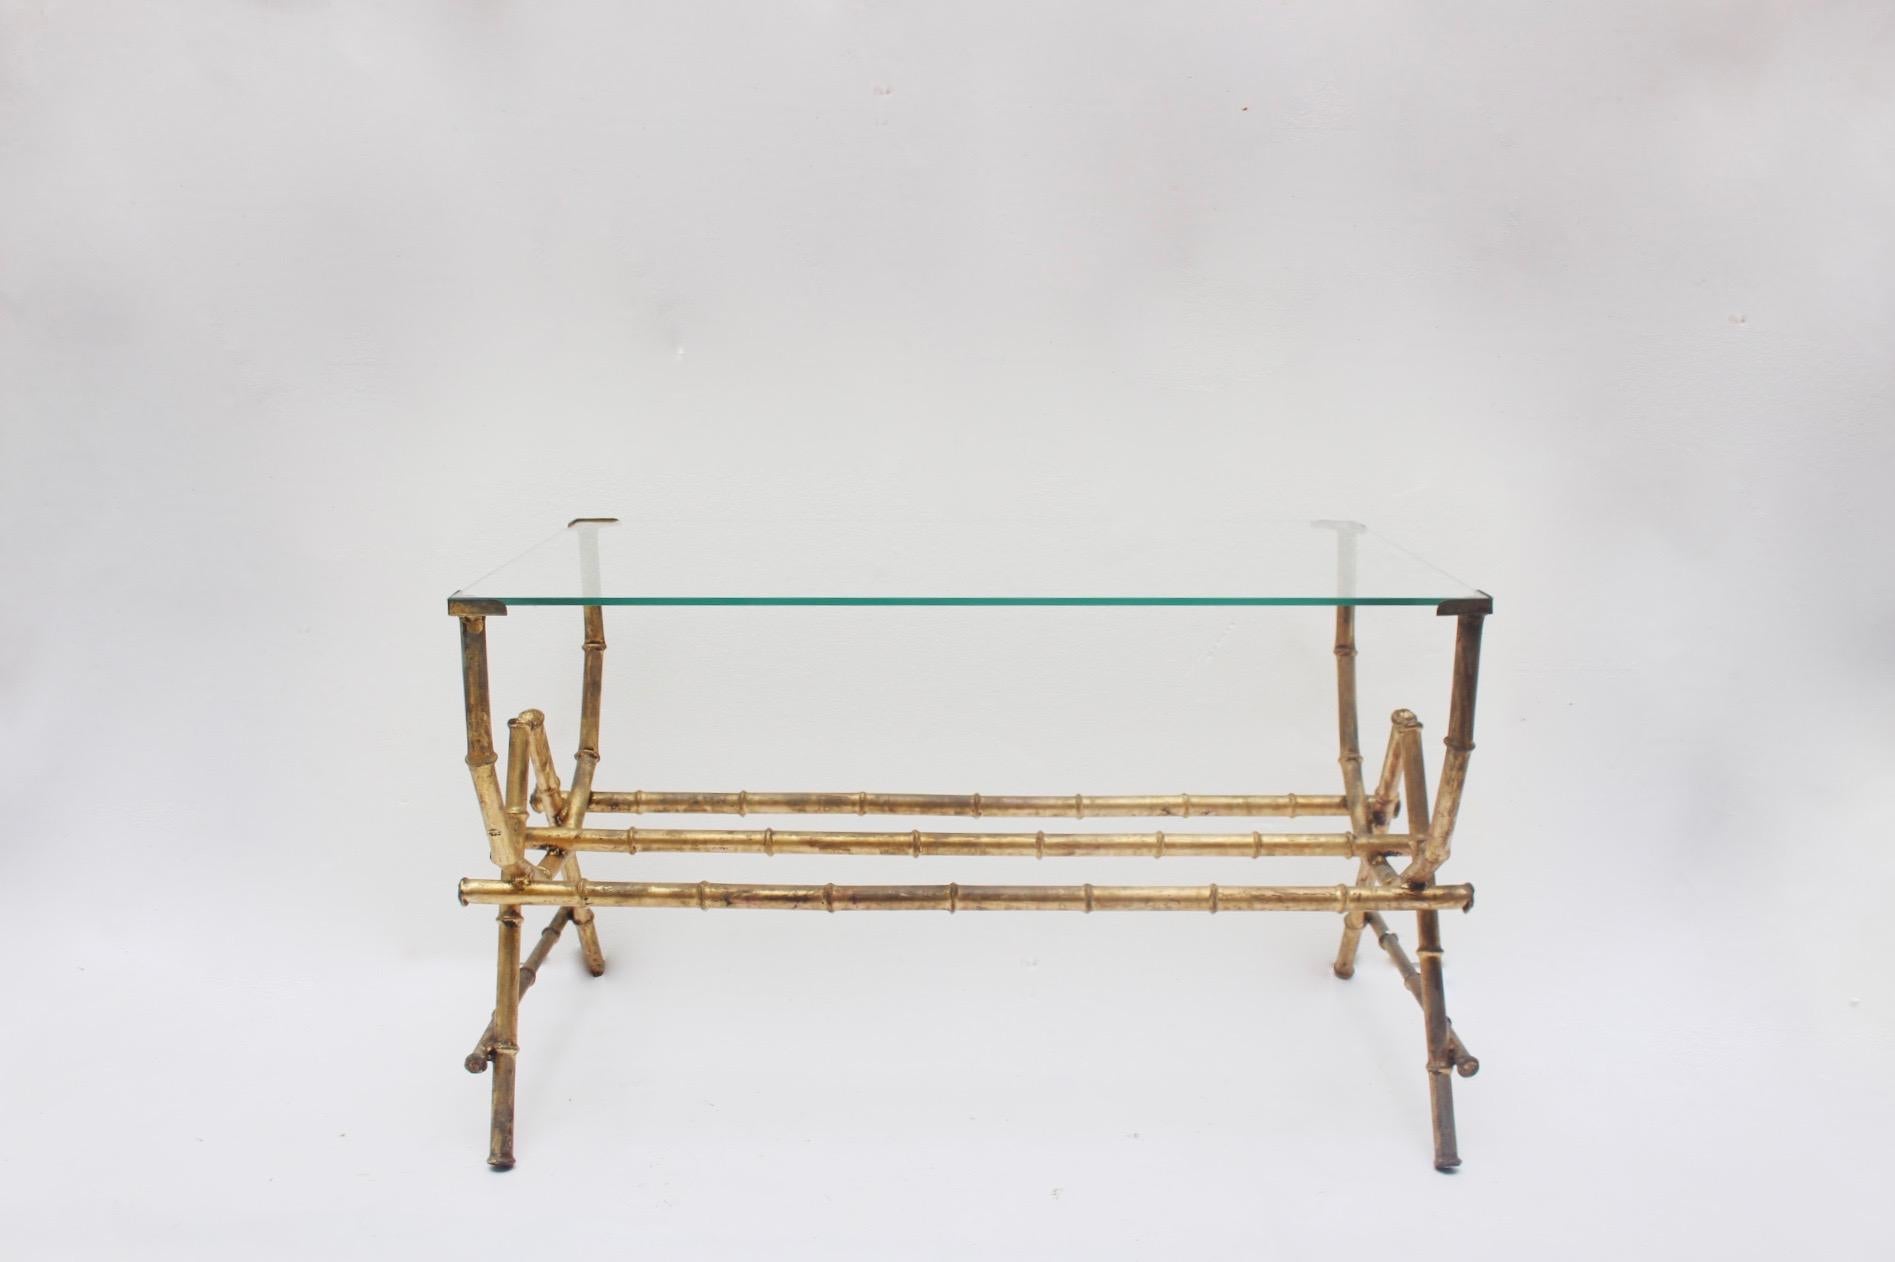 Sculptural midcentury faux bamboo gilt Iron and glass coffee side table, Spain, 1950s.
The piece, remains in good vintage condition, with a patina due to age and use. Glass it is has been added by us, an admits only one position. We don't know if